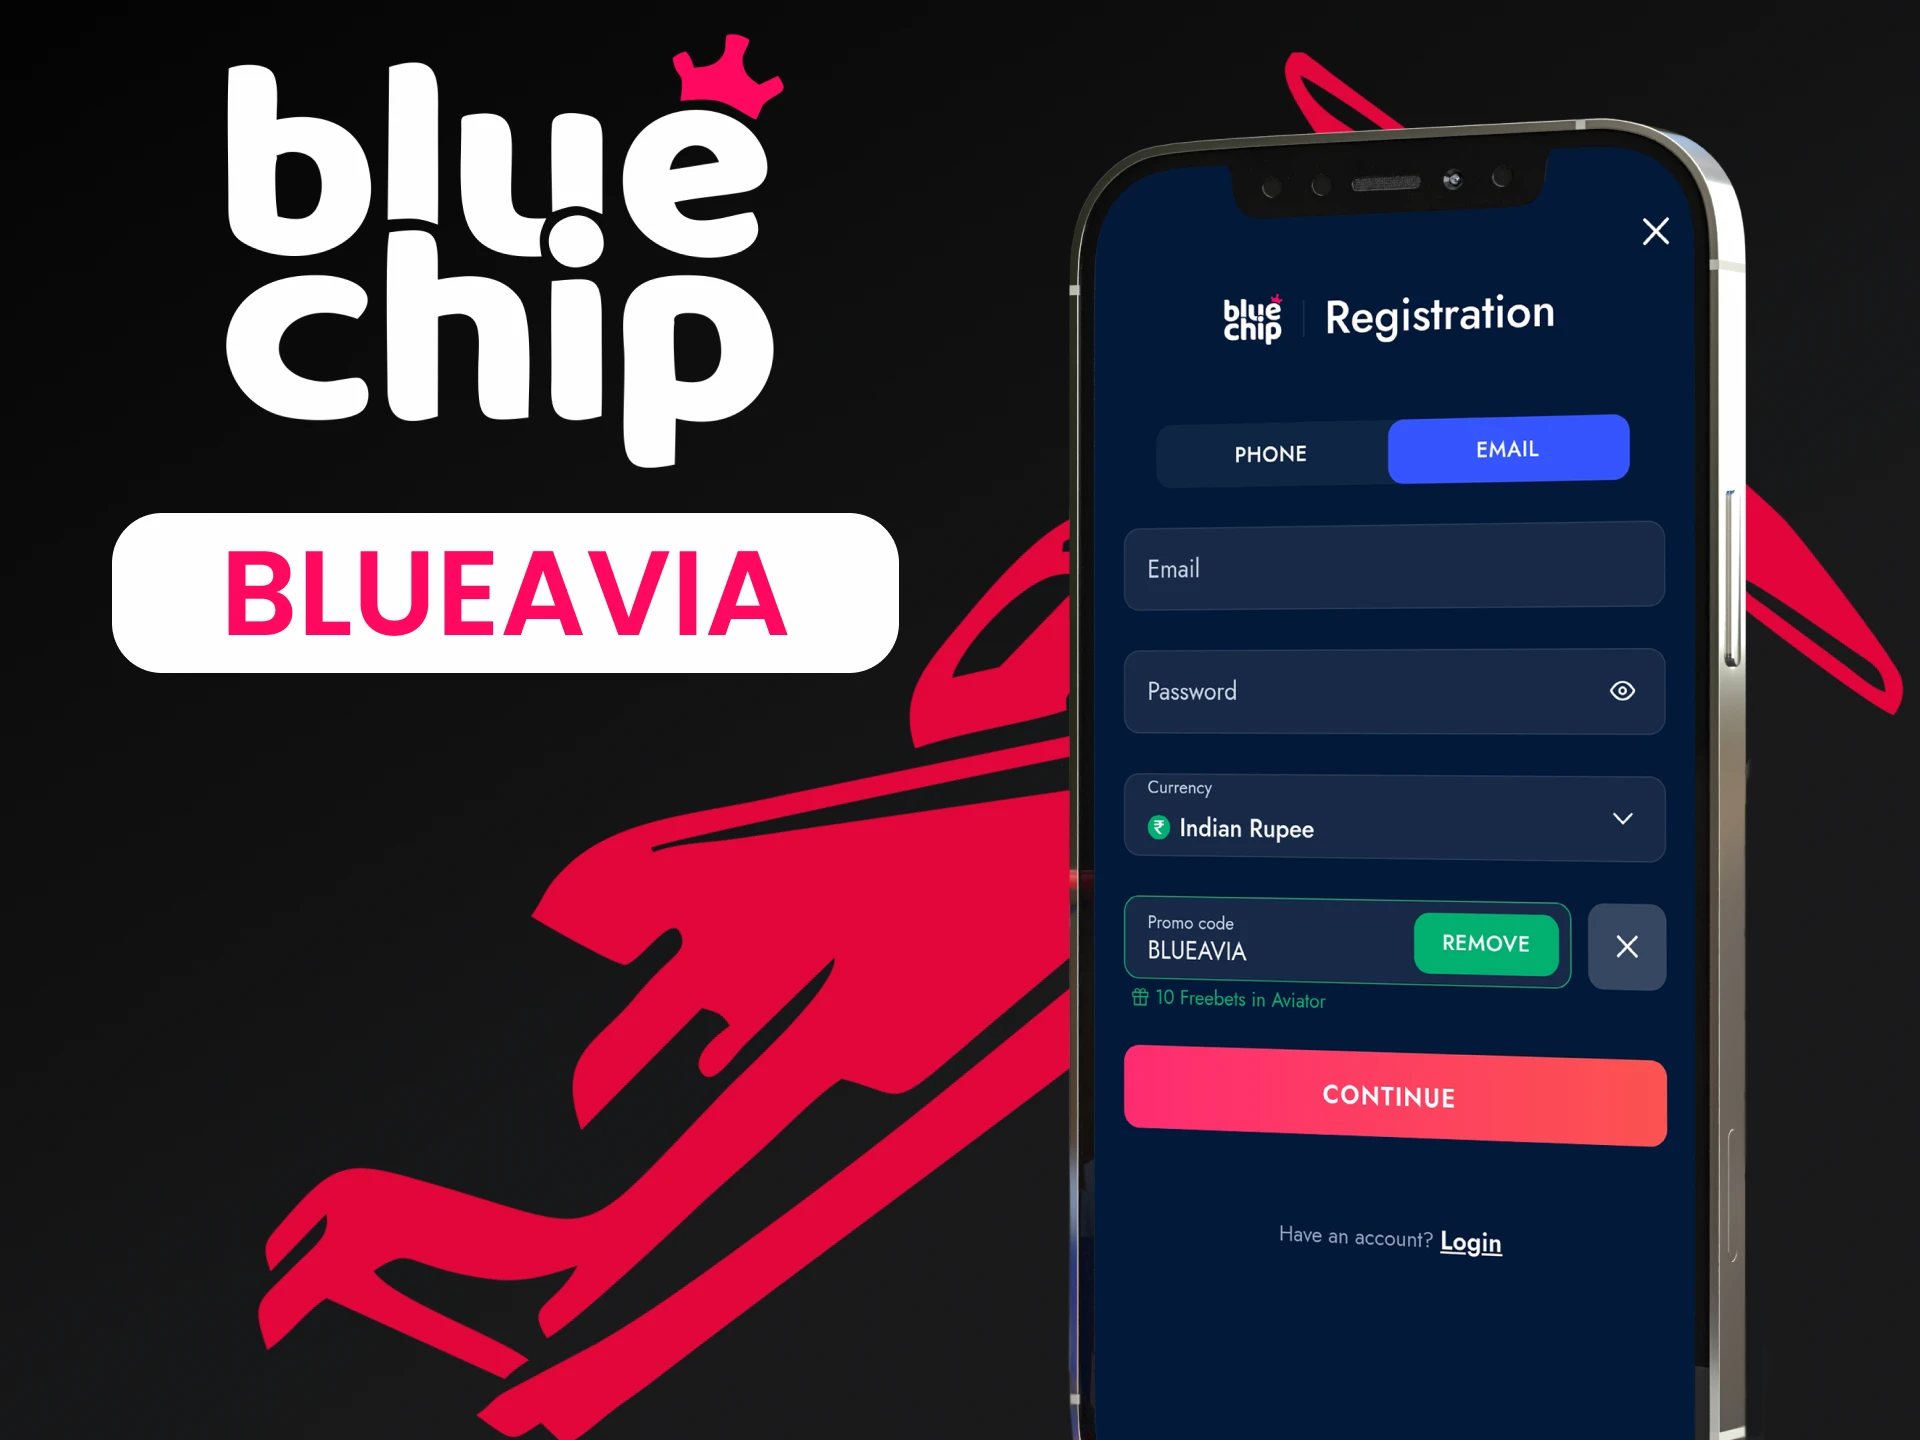 Follow a couple of simple steps to enter the Bluechip promo code.